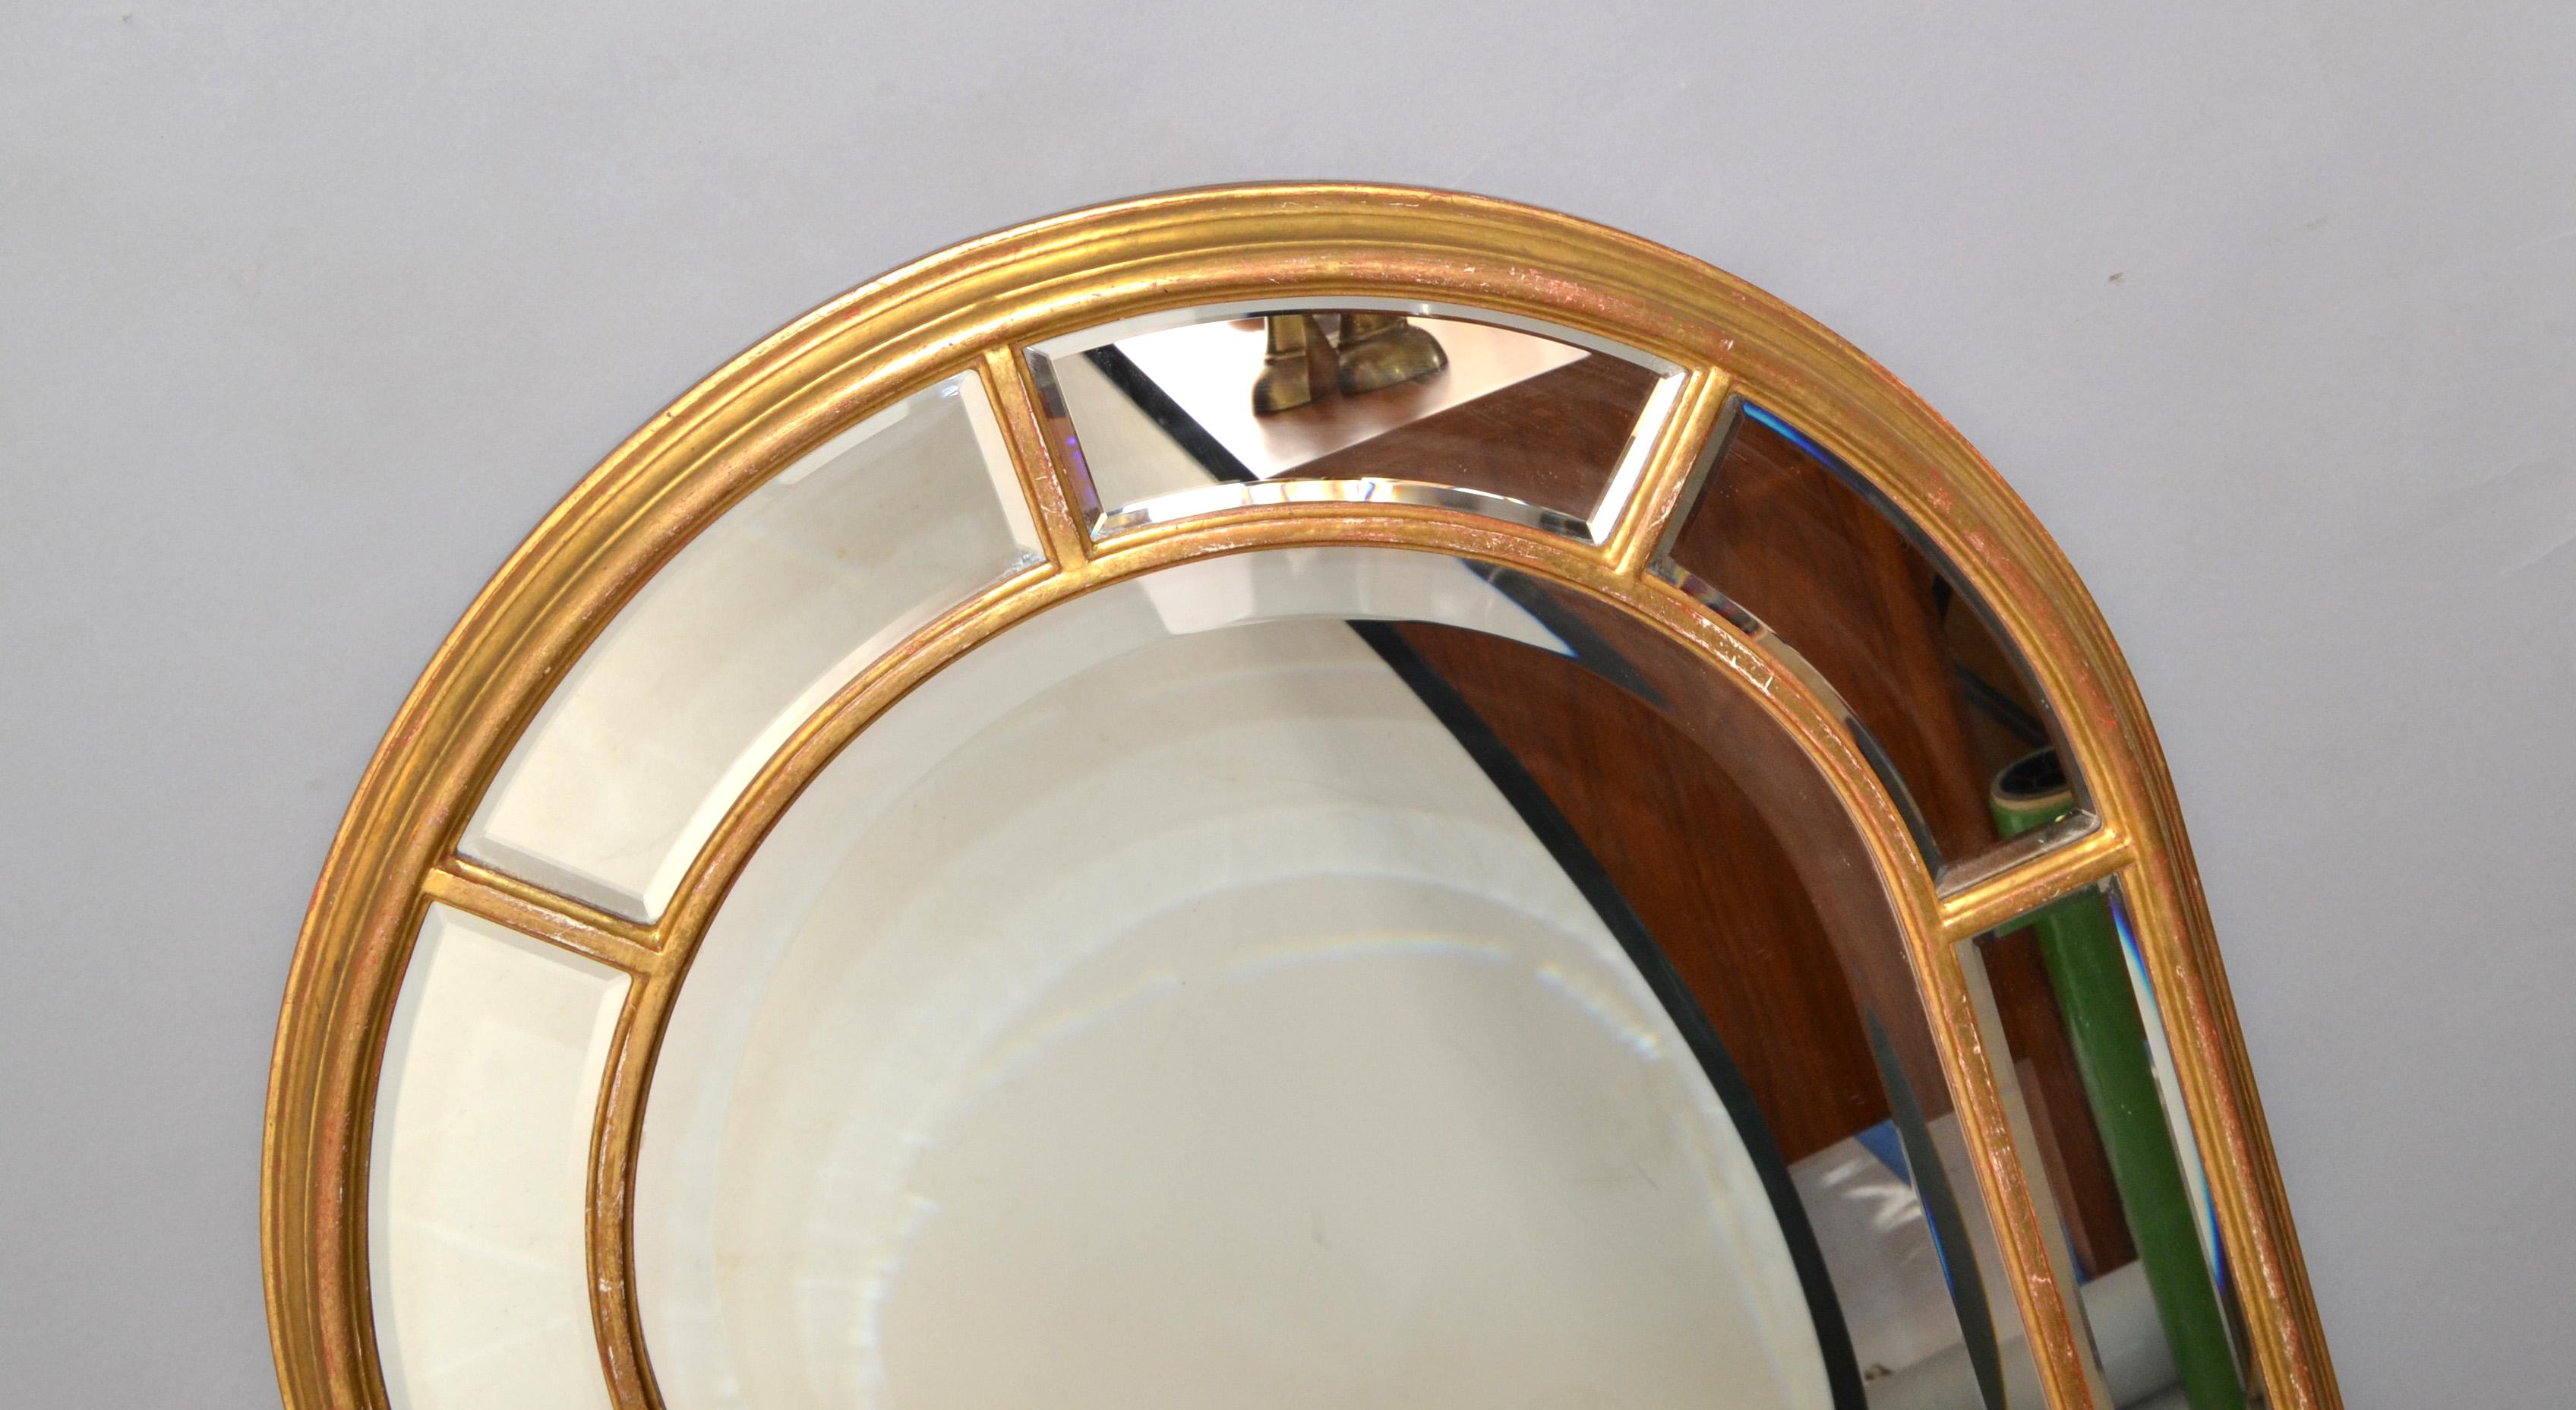 1970s Arch Shaped Italian Firenze Beveled Glass Wall Mirror with Gilt Wood Frame For Sale 5